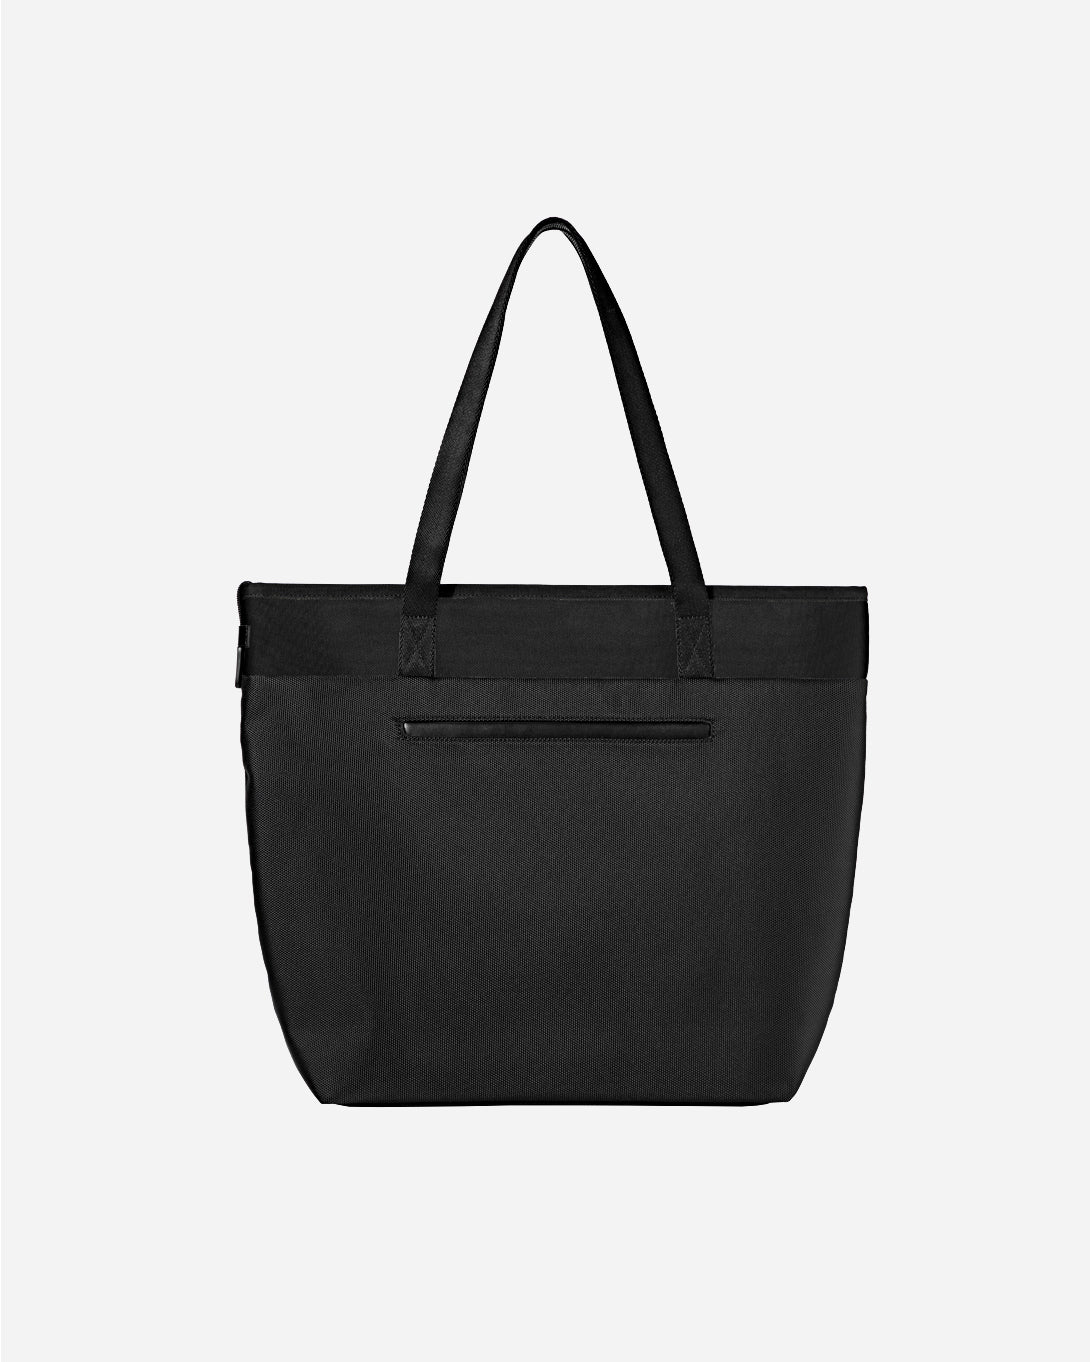 Black All-Things Tote Bag ONS Clothing Bag Accessory